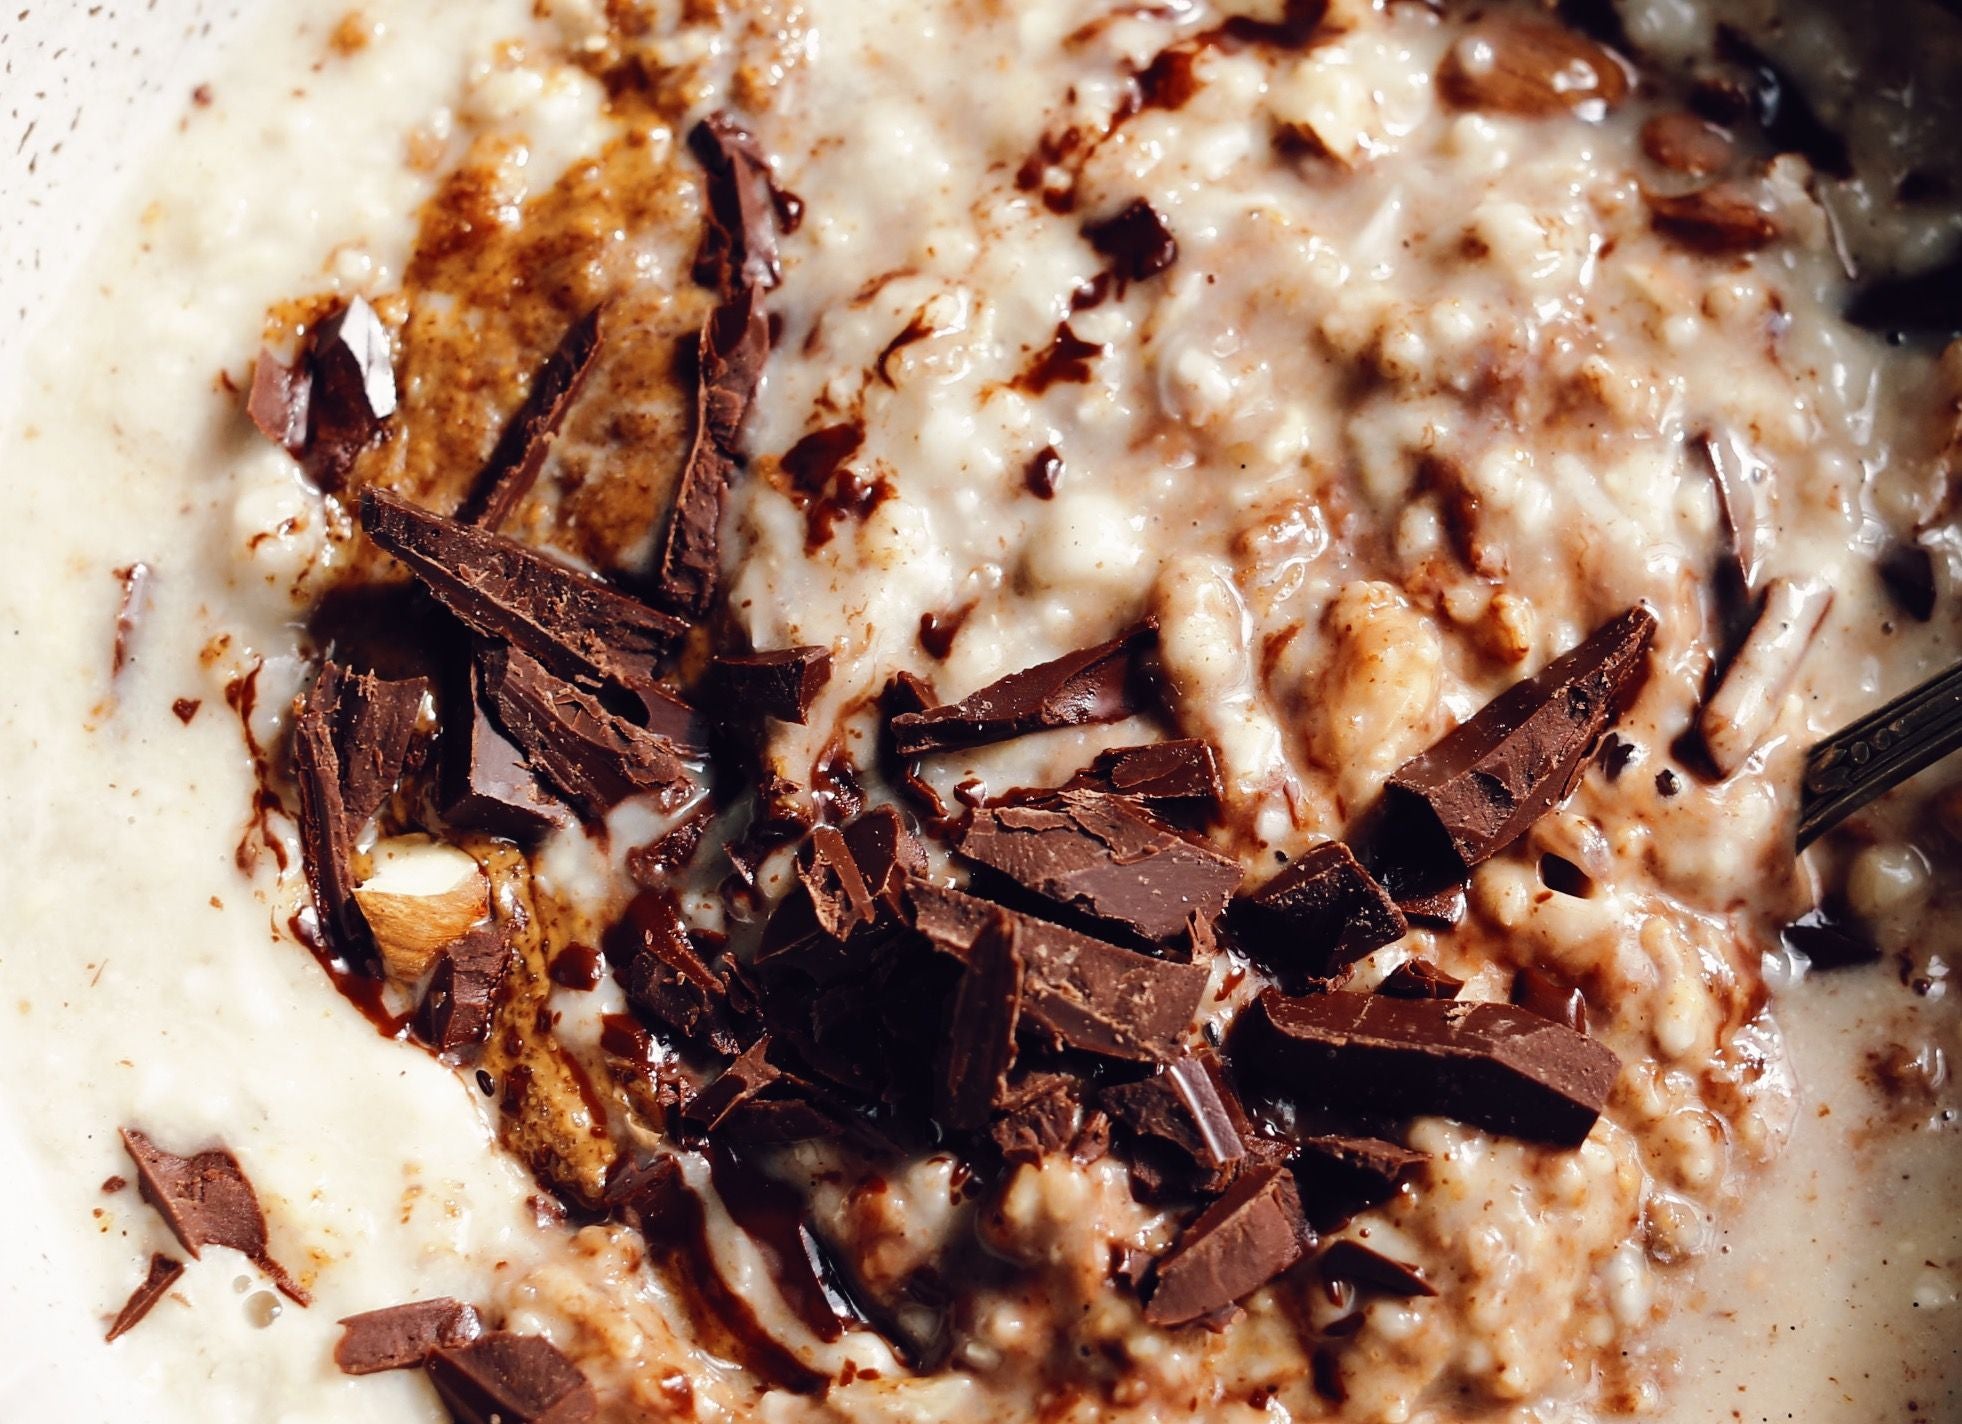 Chocolate Almond Butter Oatmeal